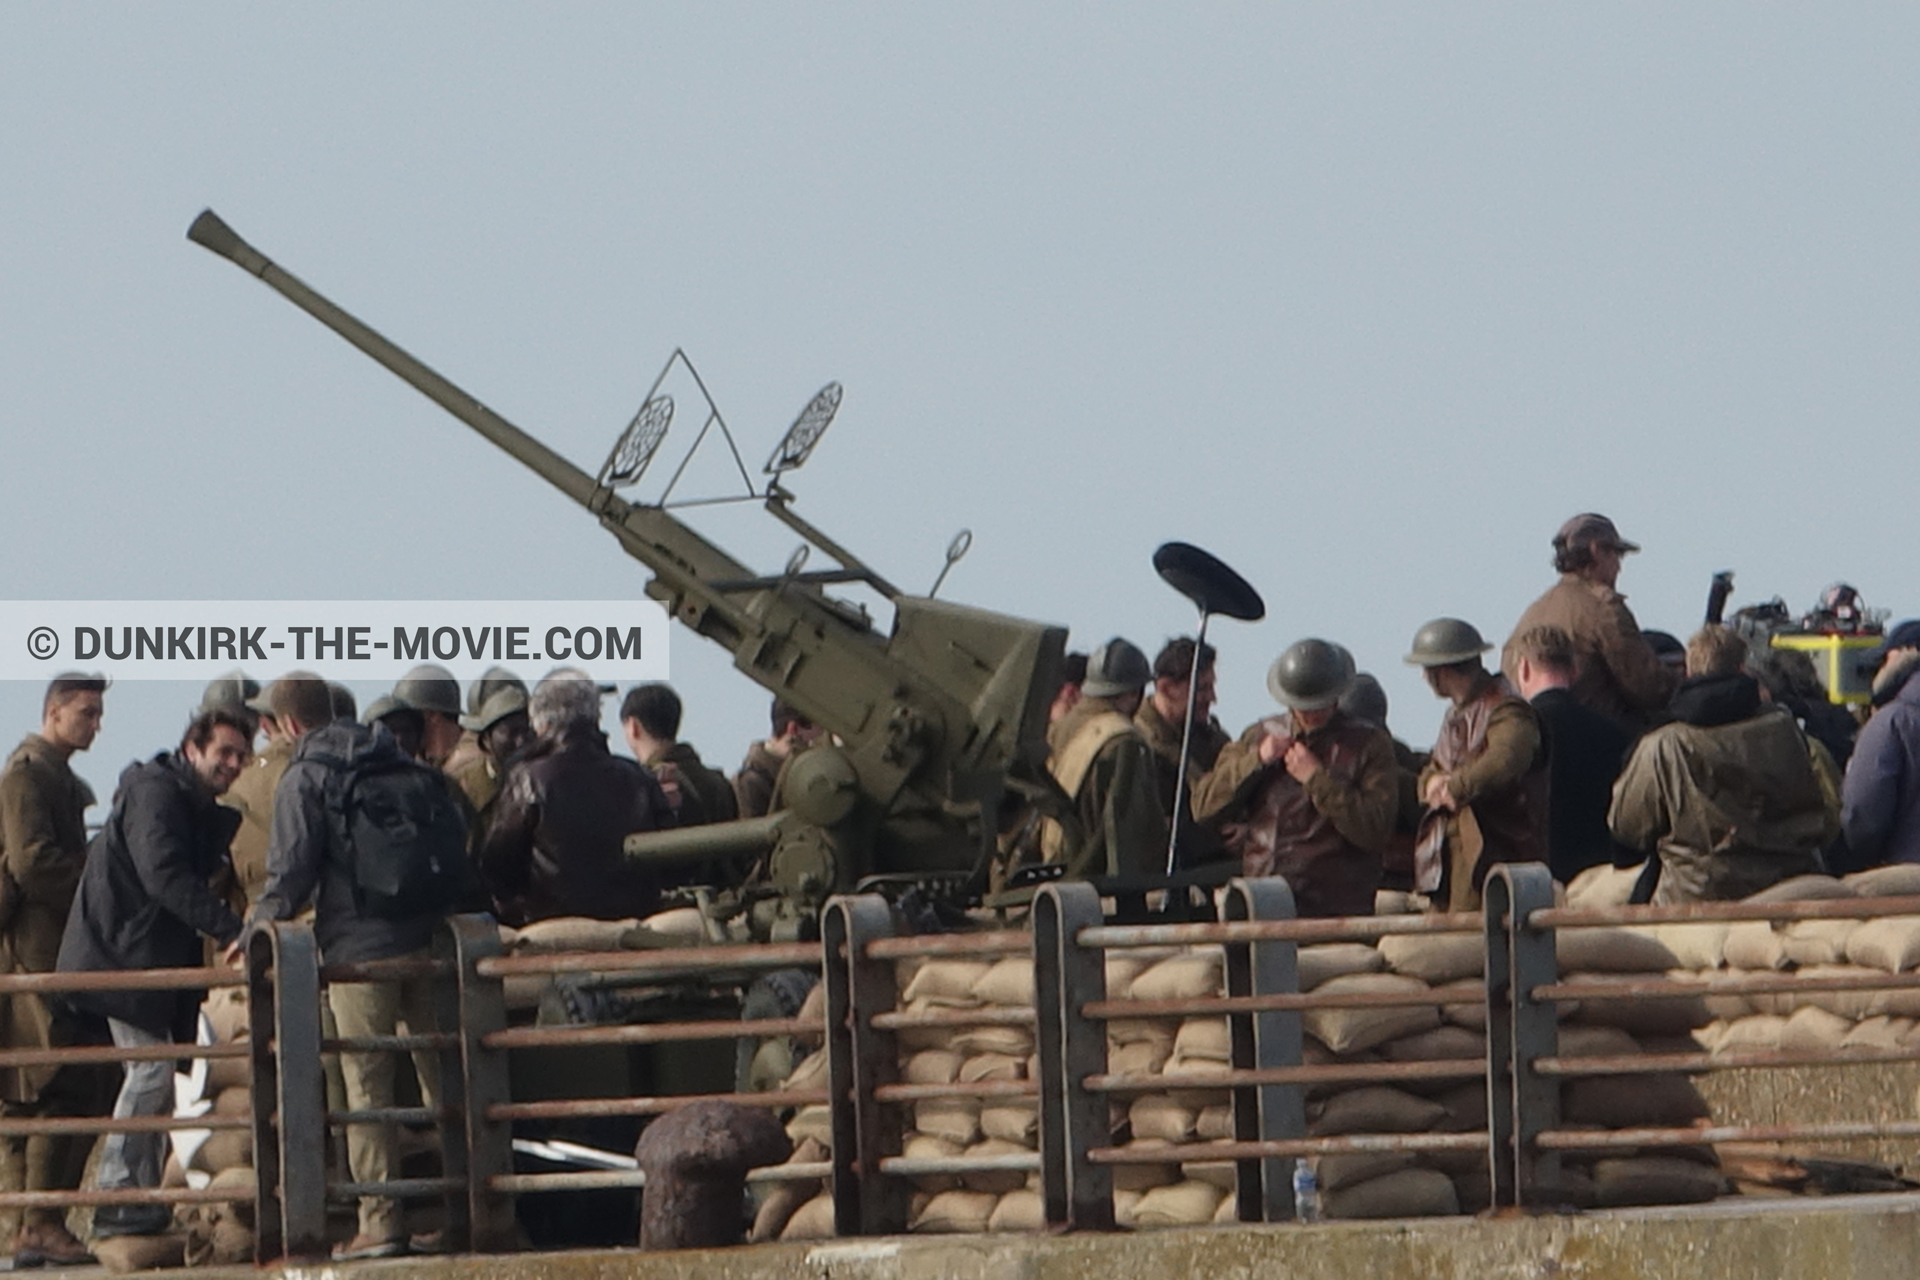 Picture with IMAX camera, cannon, supernumeraries, EST pier, Christopher Nolan, Nilo Otero,  from behind the scene of the Dunkirk movie by Nolan